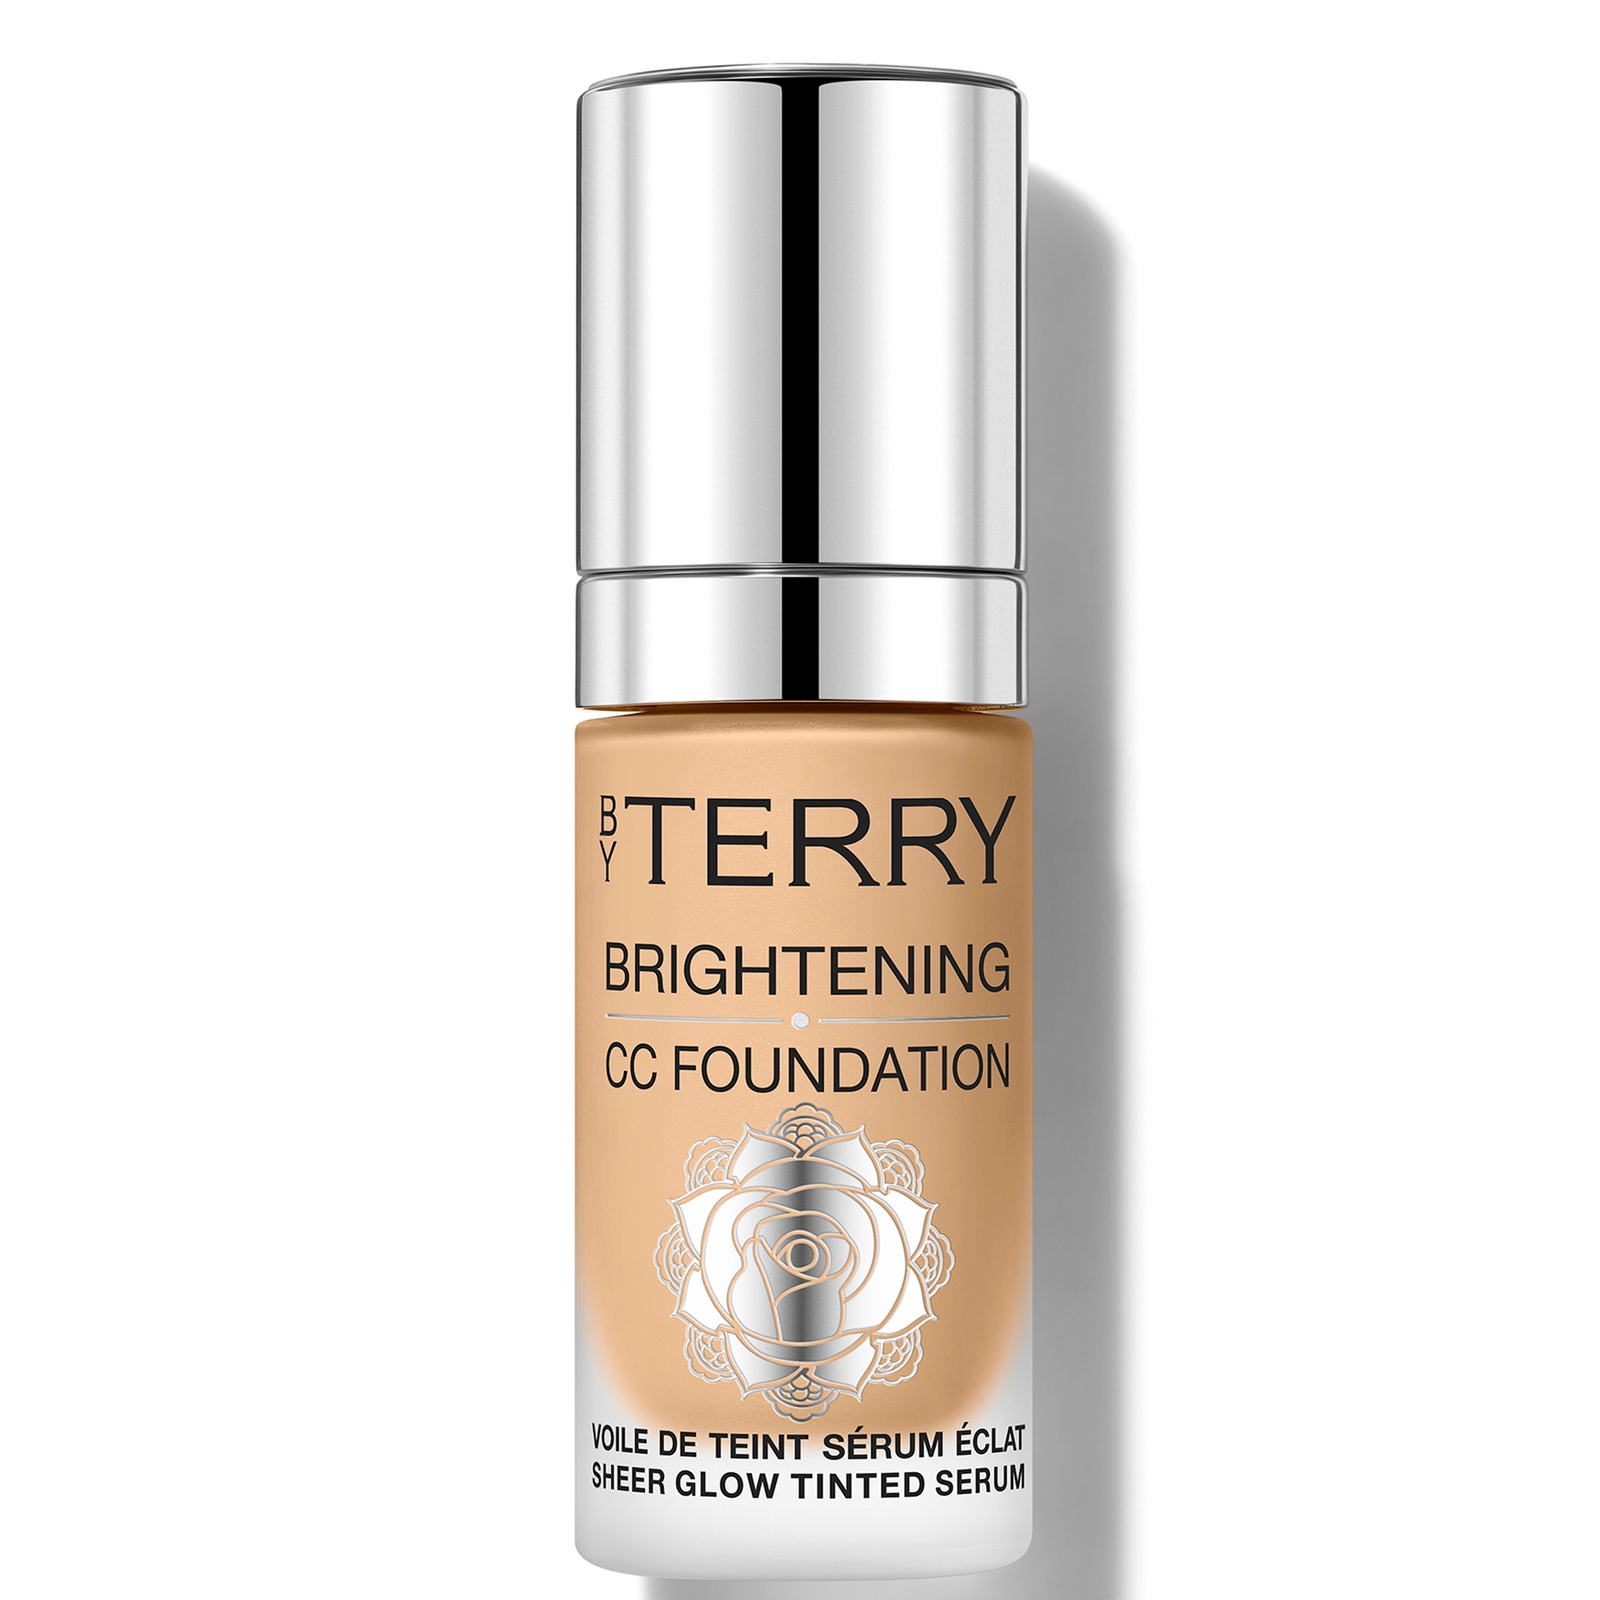 Image of By Terry Brightening CC Foundation 30ml (Various Shades) - 5W - MEDIUM TAN WARM